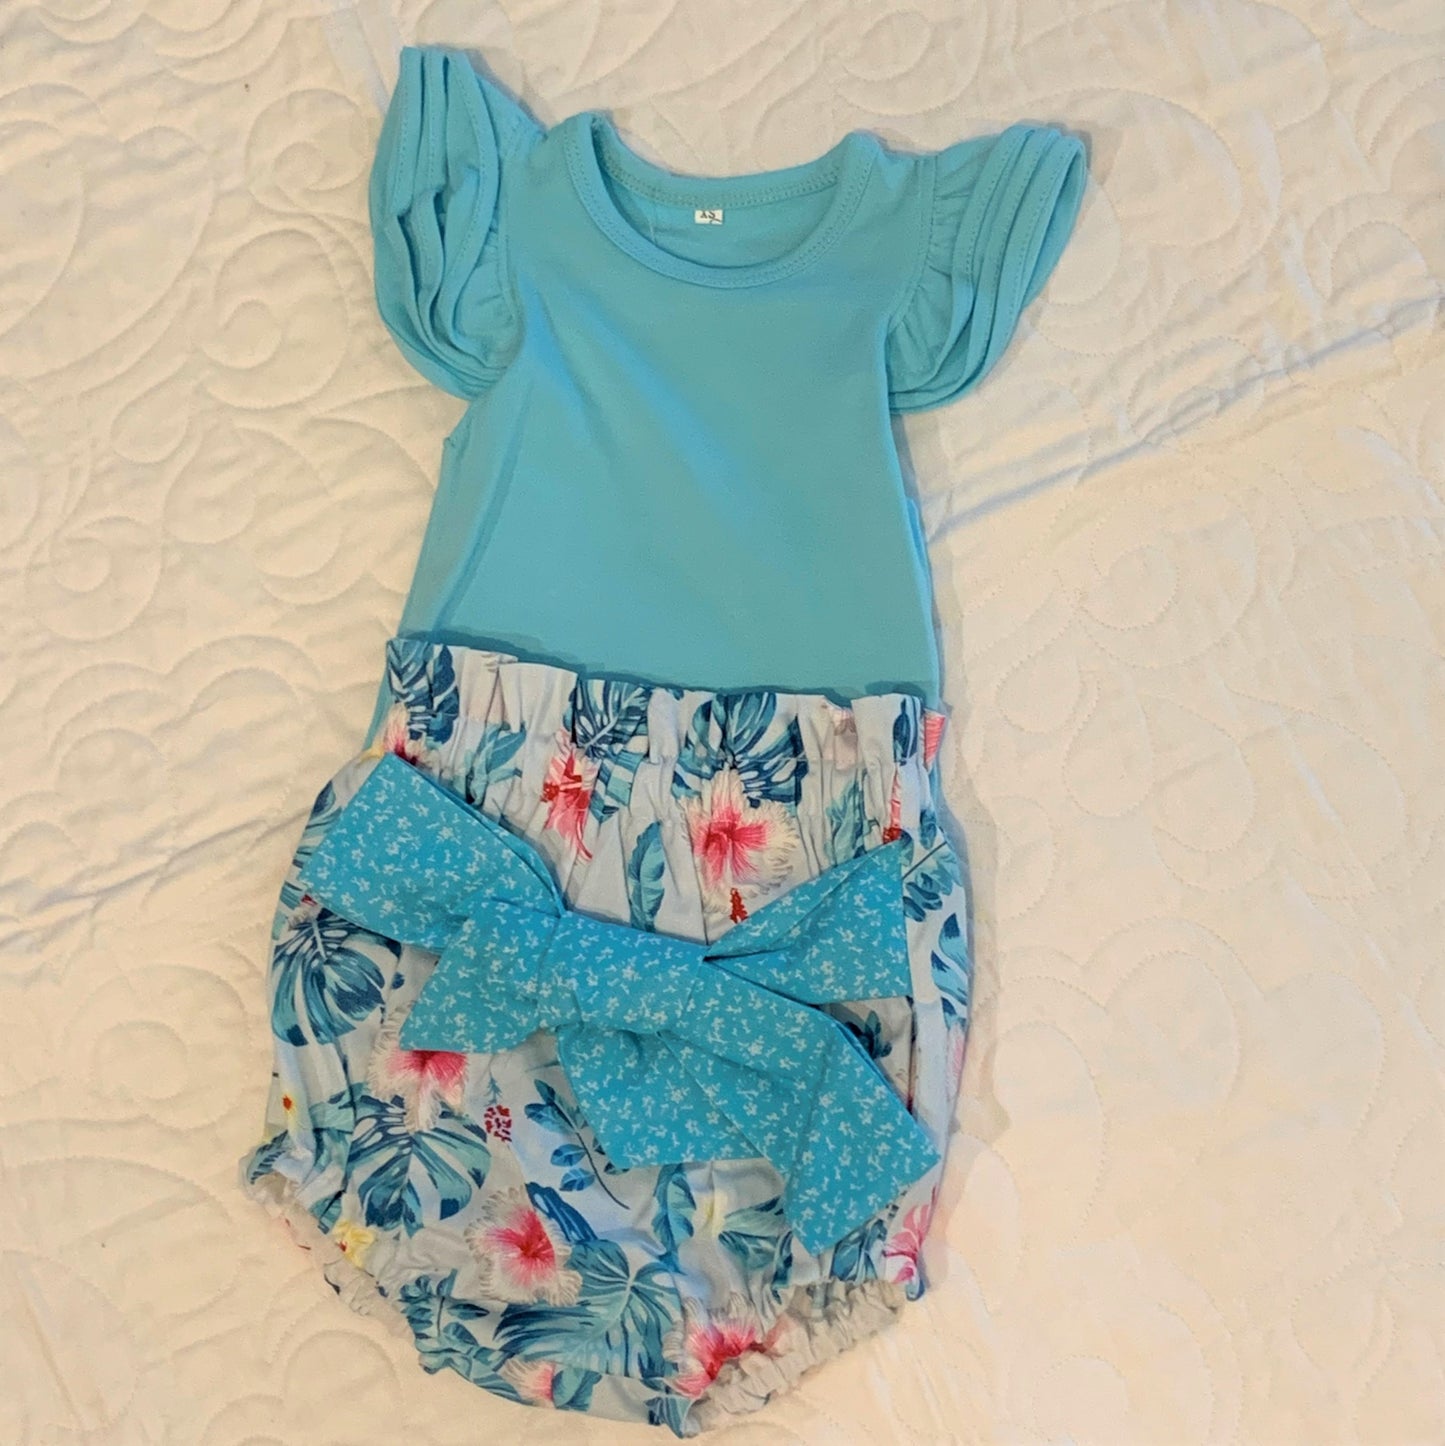 2 Piece Set - High Waisted Nappy Cover with Sash Bow & ReadyMade Flutter Bodysuit